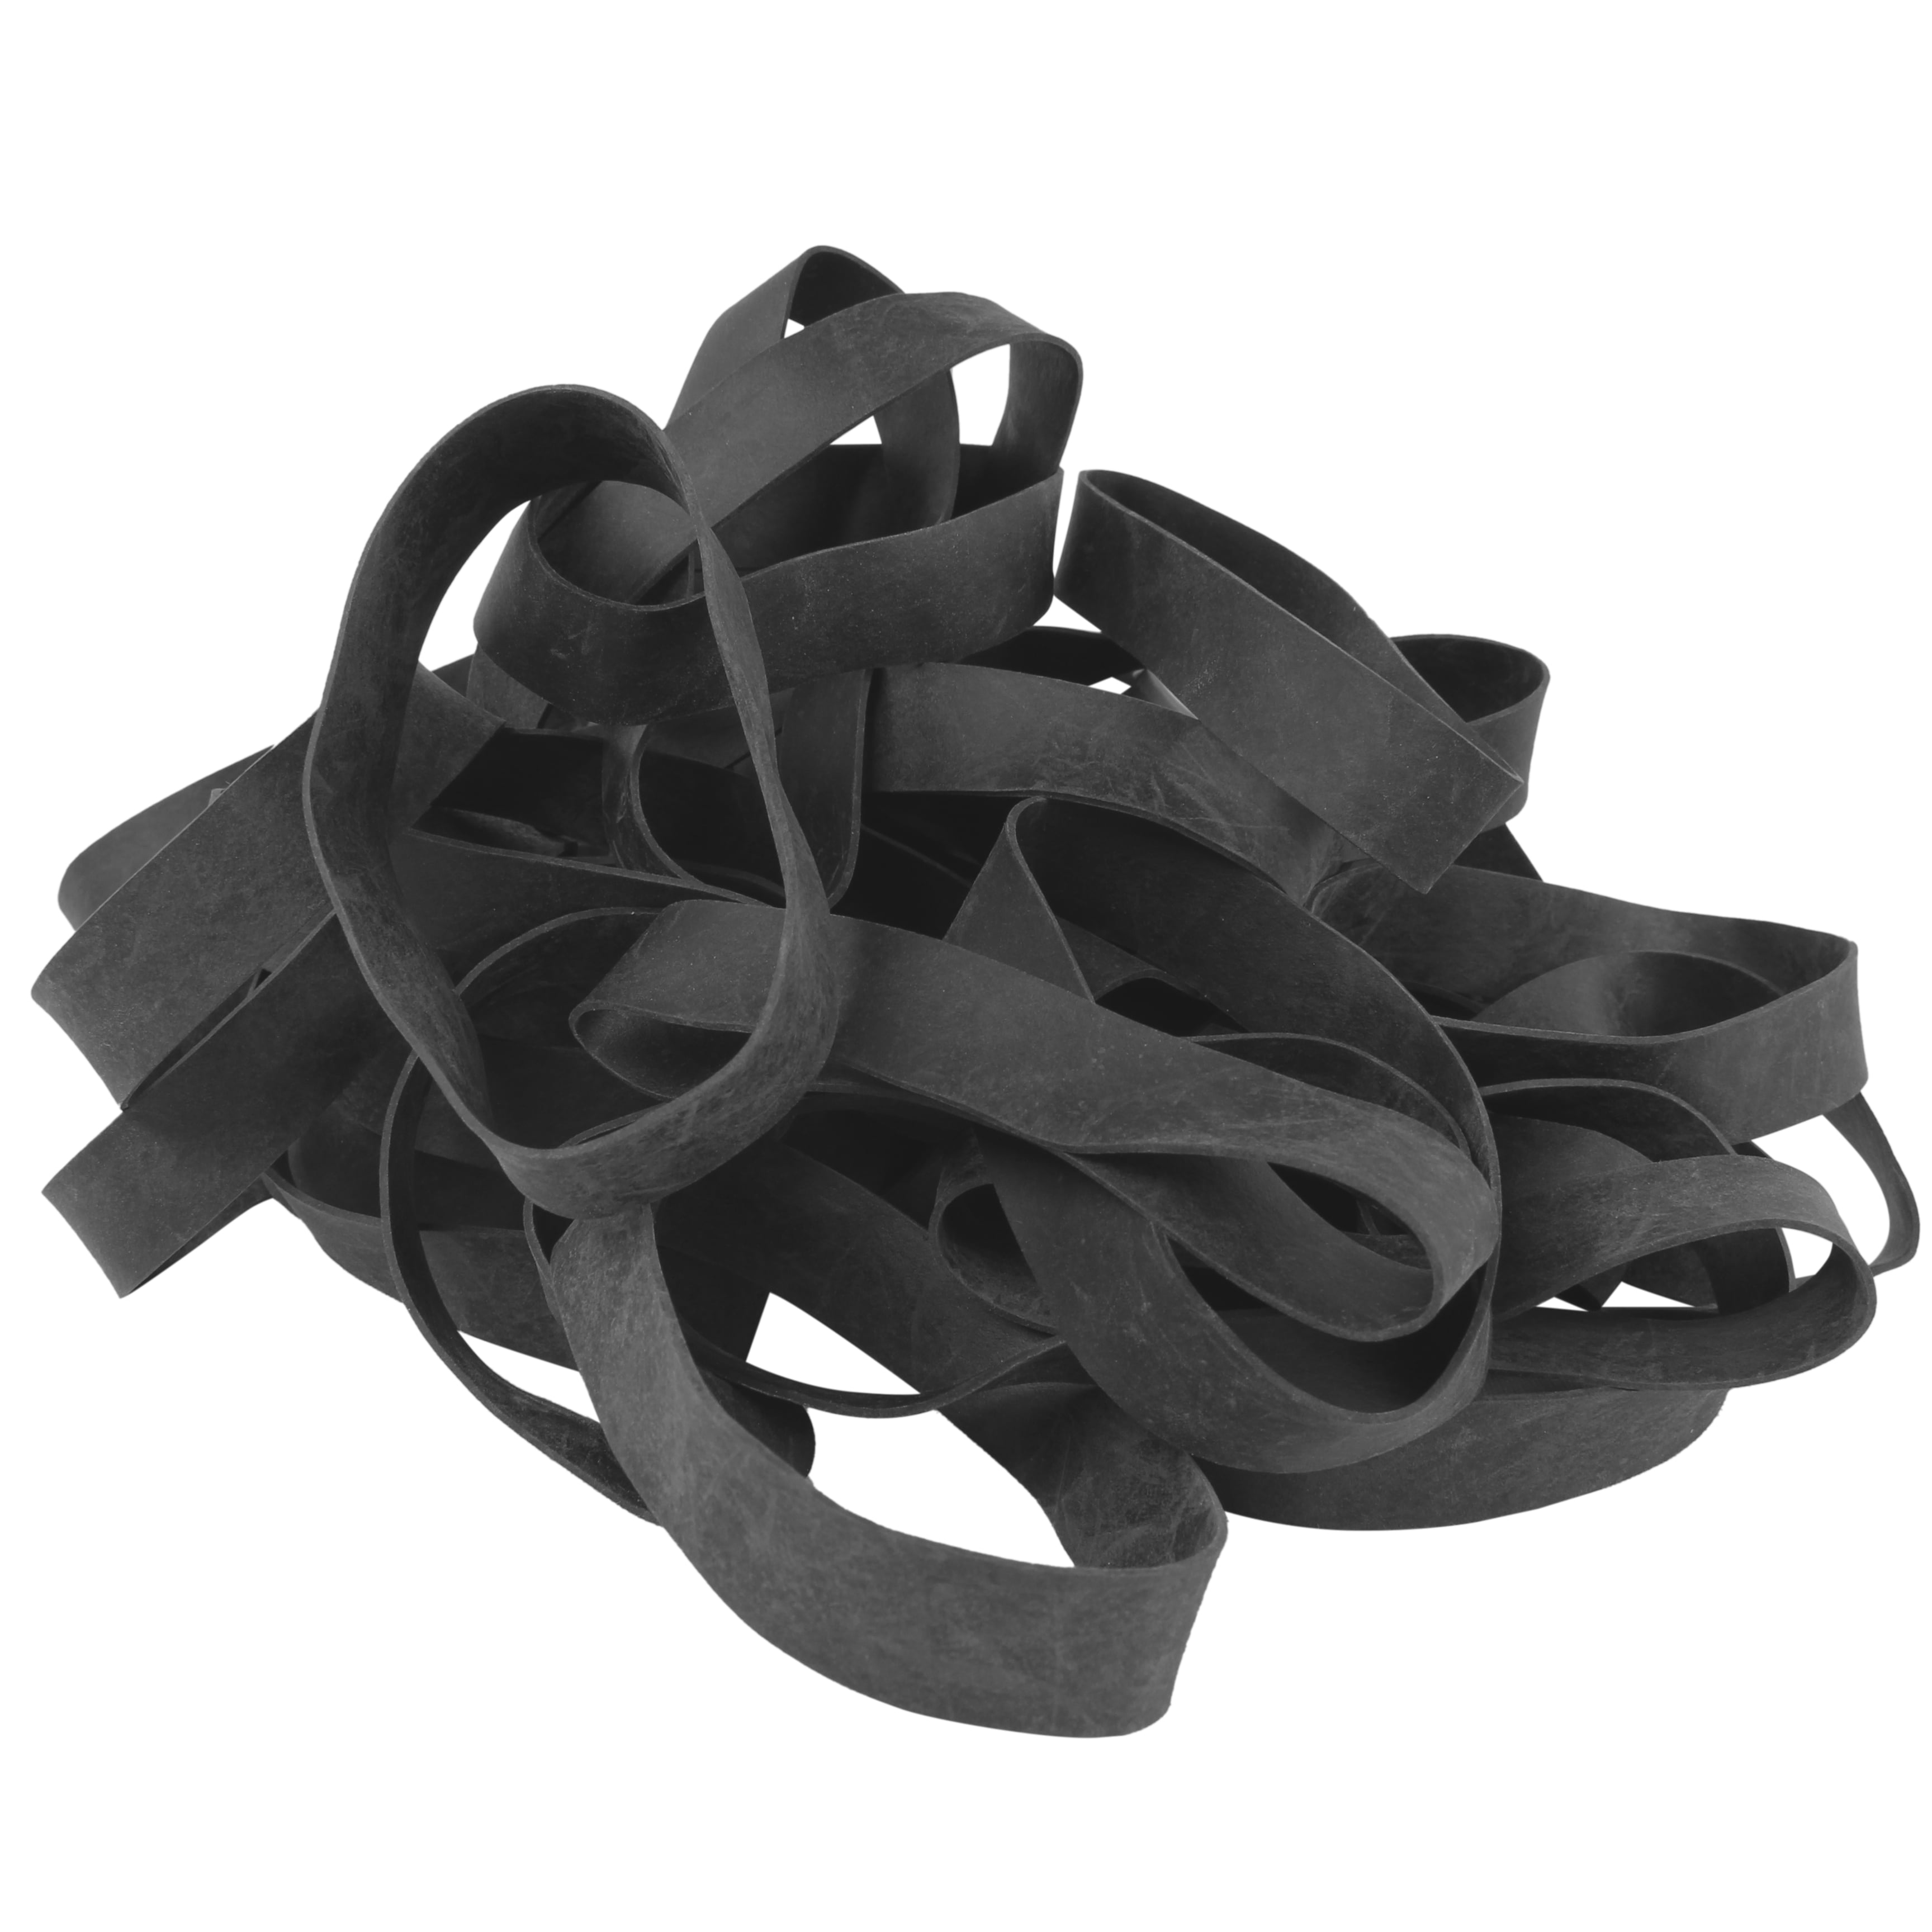 Crafted-Brand Heavy Duty Rubber Bands | Big Thick XL-Large UV Resistant  Black Rubber-Bands for Fishing, RC, or Hair + Use What the Pros Use + 1/4  LB